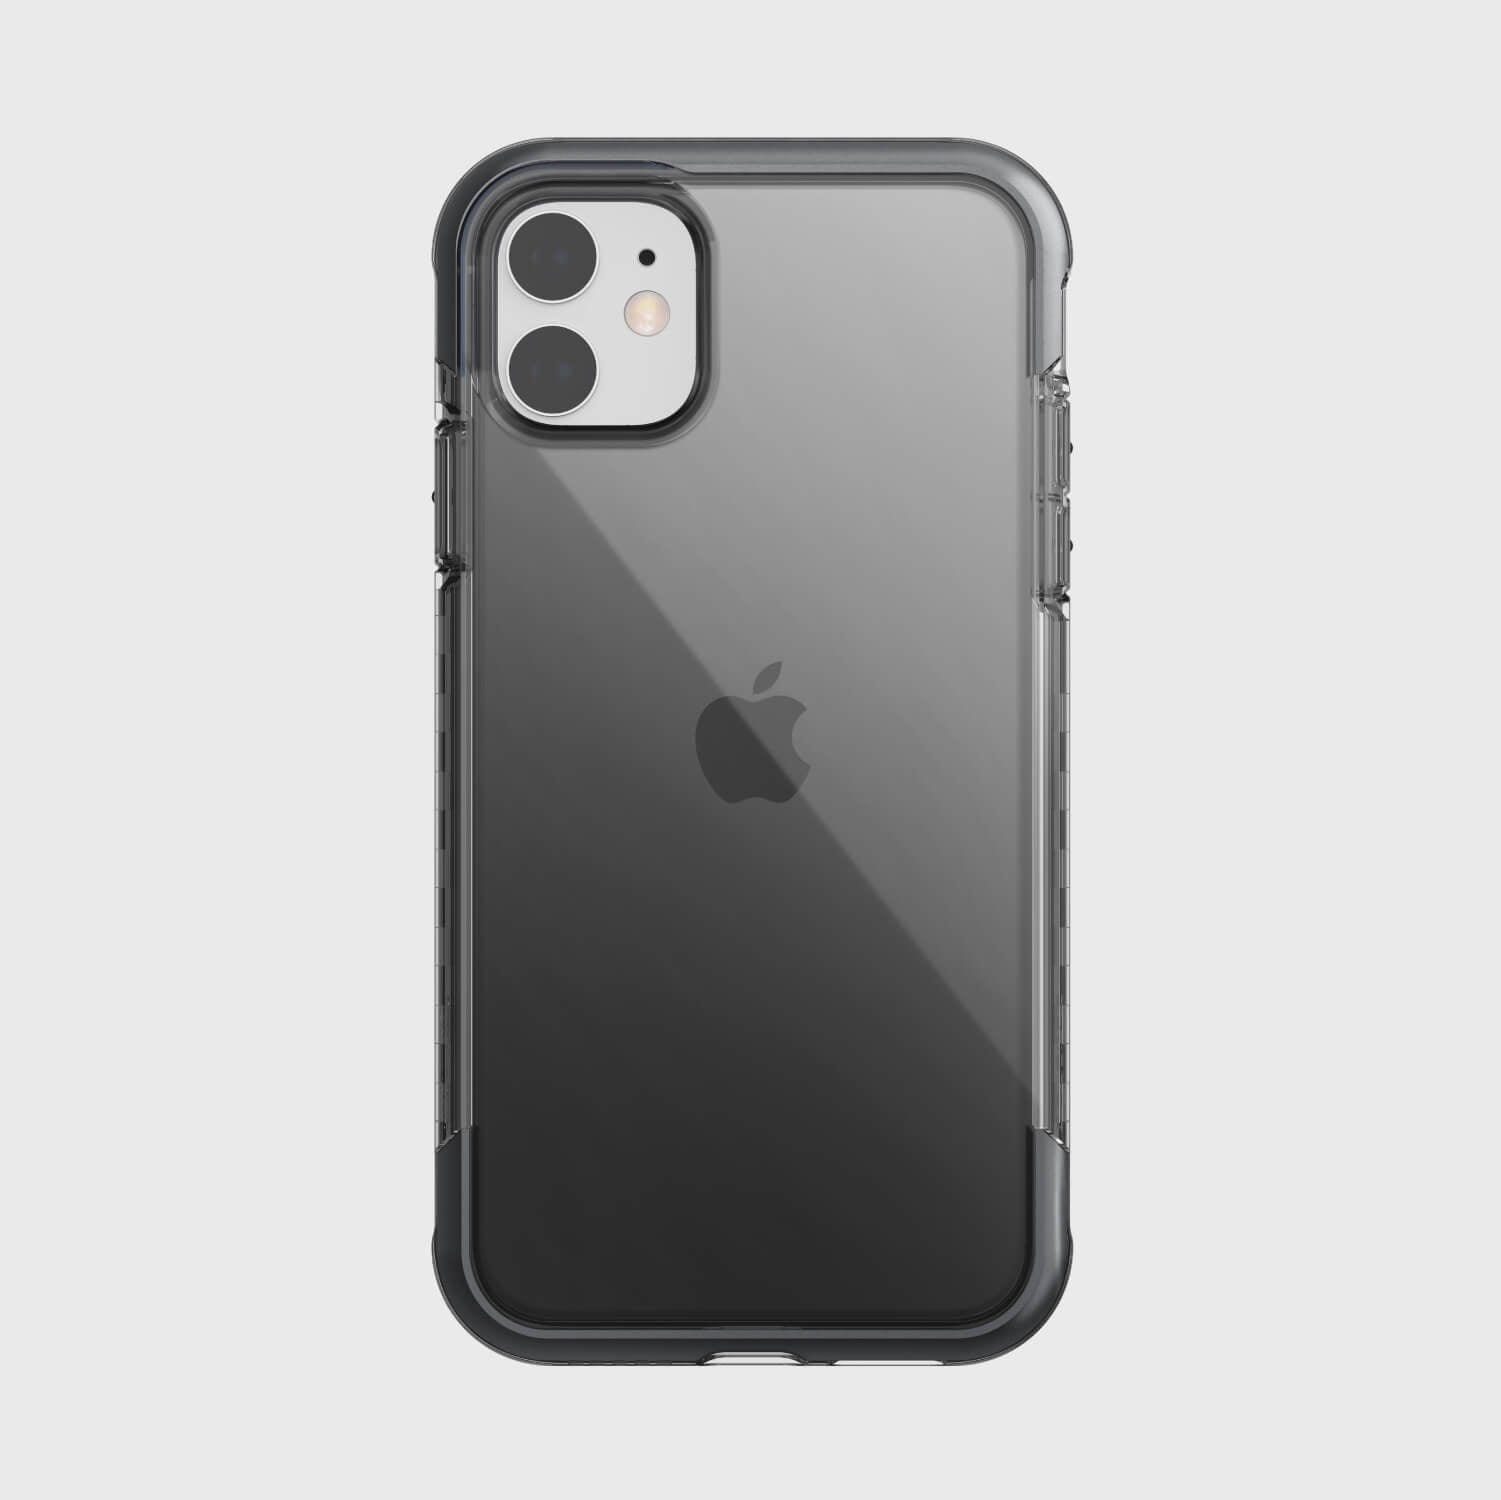 The back view of a Raptic AIR iPhone 11 Pro Case with drop protection in black.